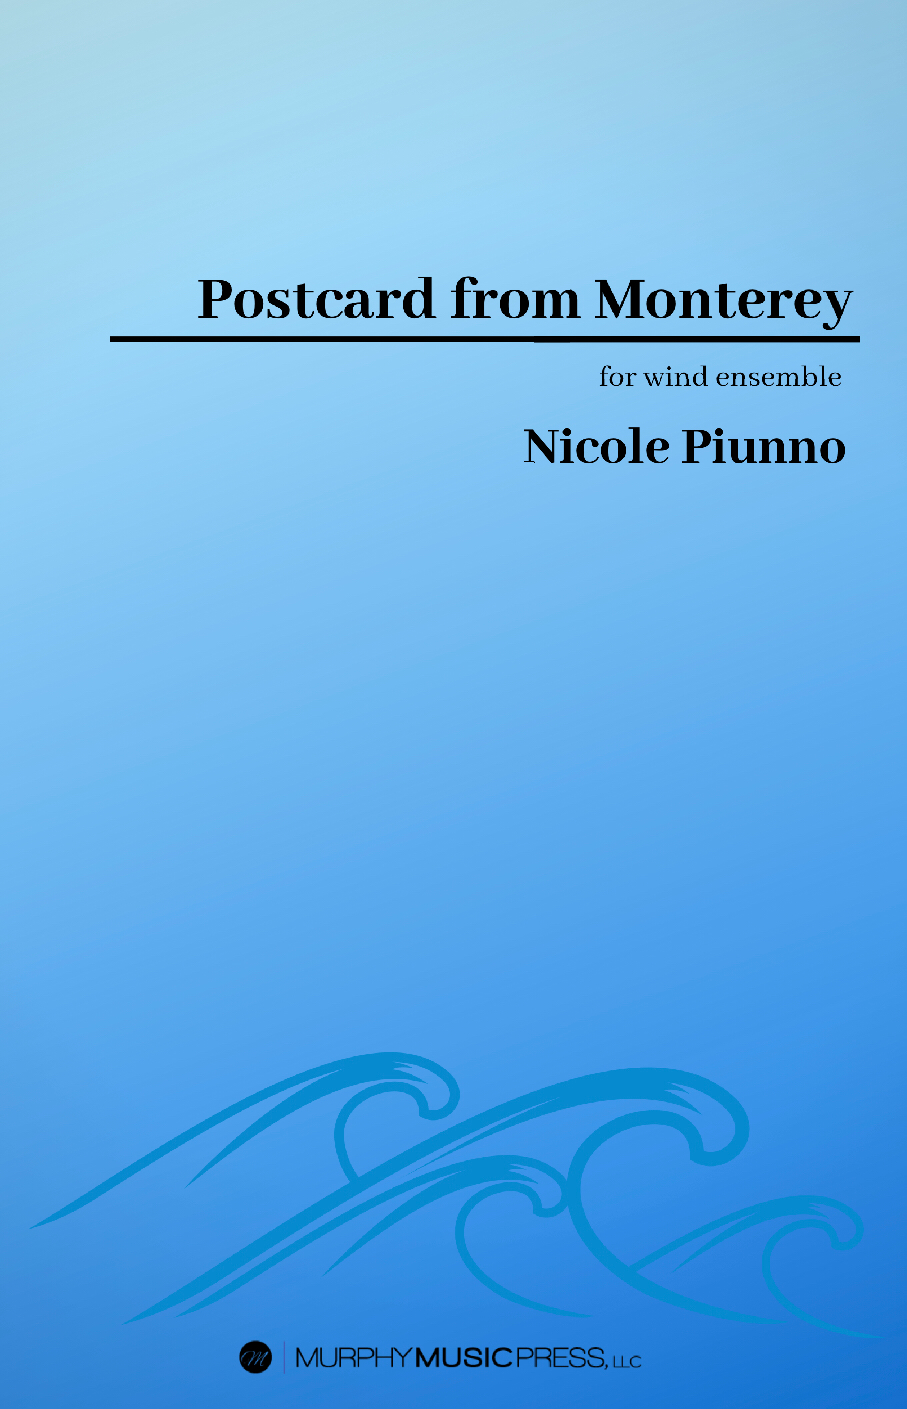 Postcard From Monterey  by Nicole Piunno